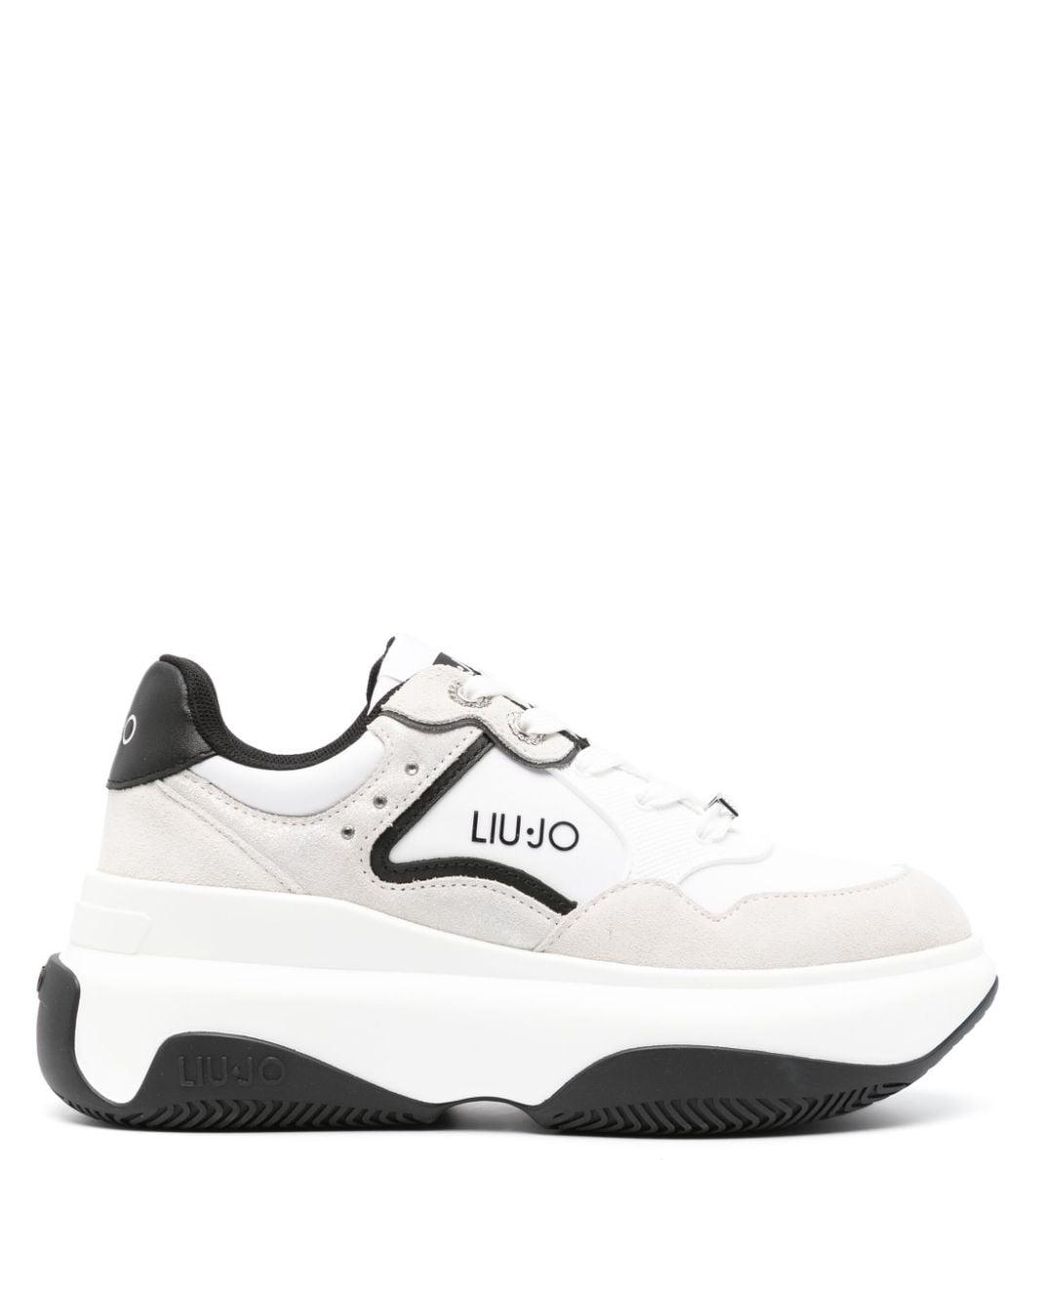 Liu Jo Crystal-embellished Leather Sneakers in White | Lyst